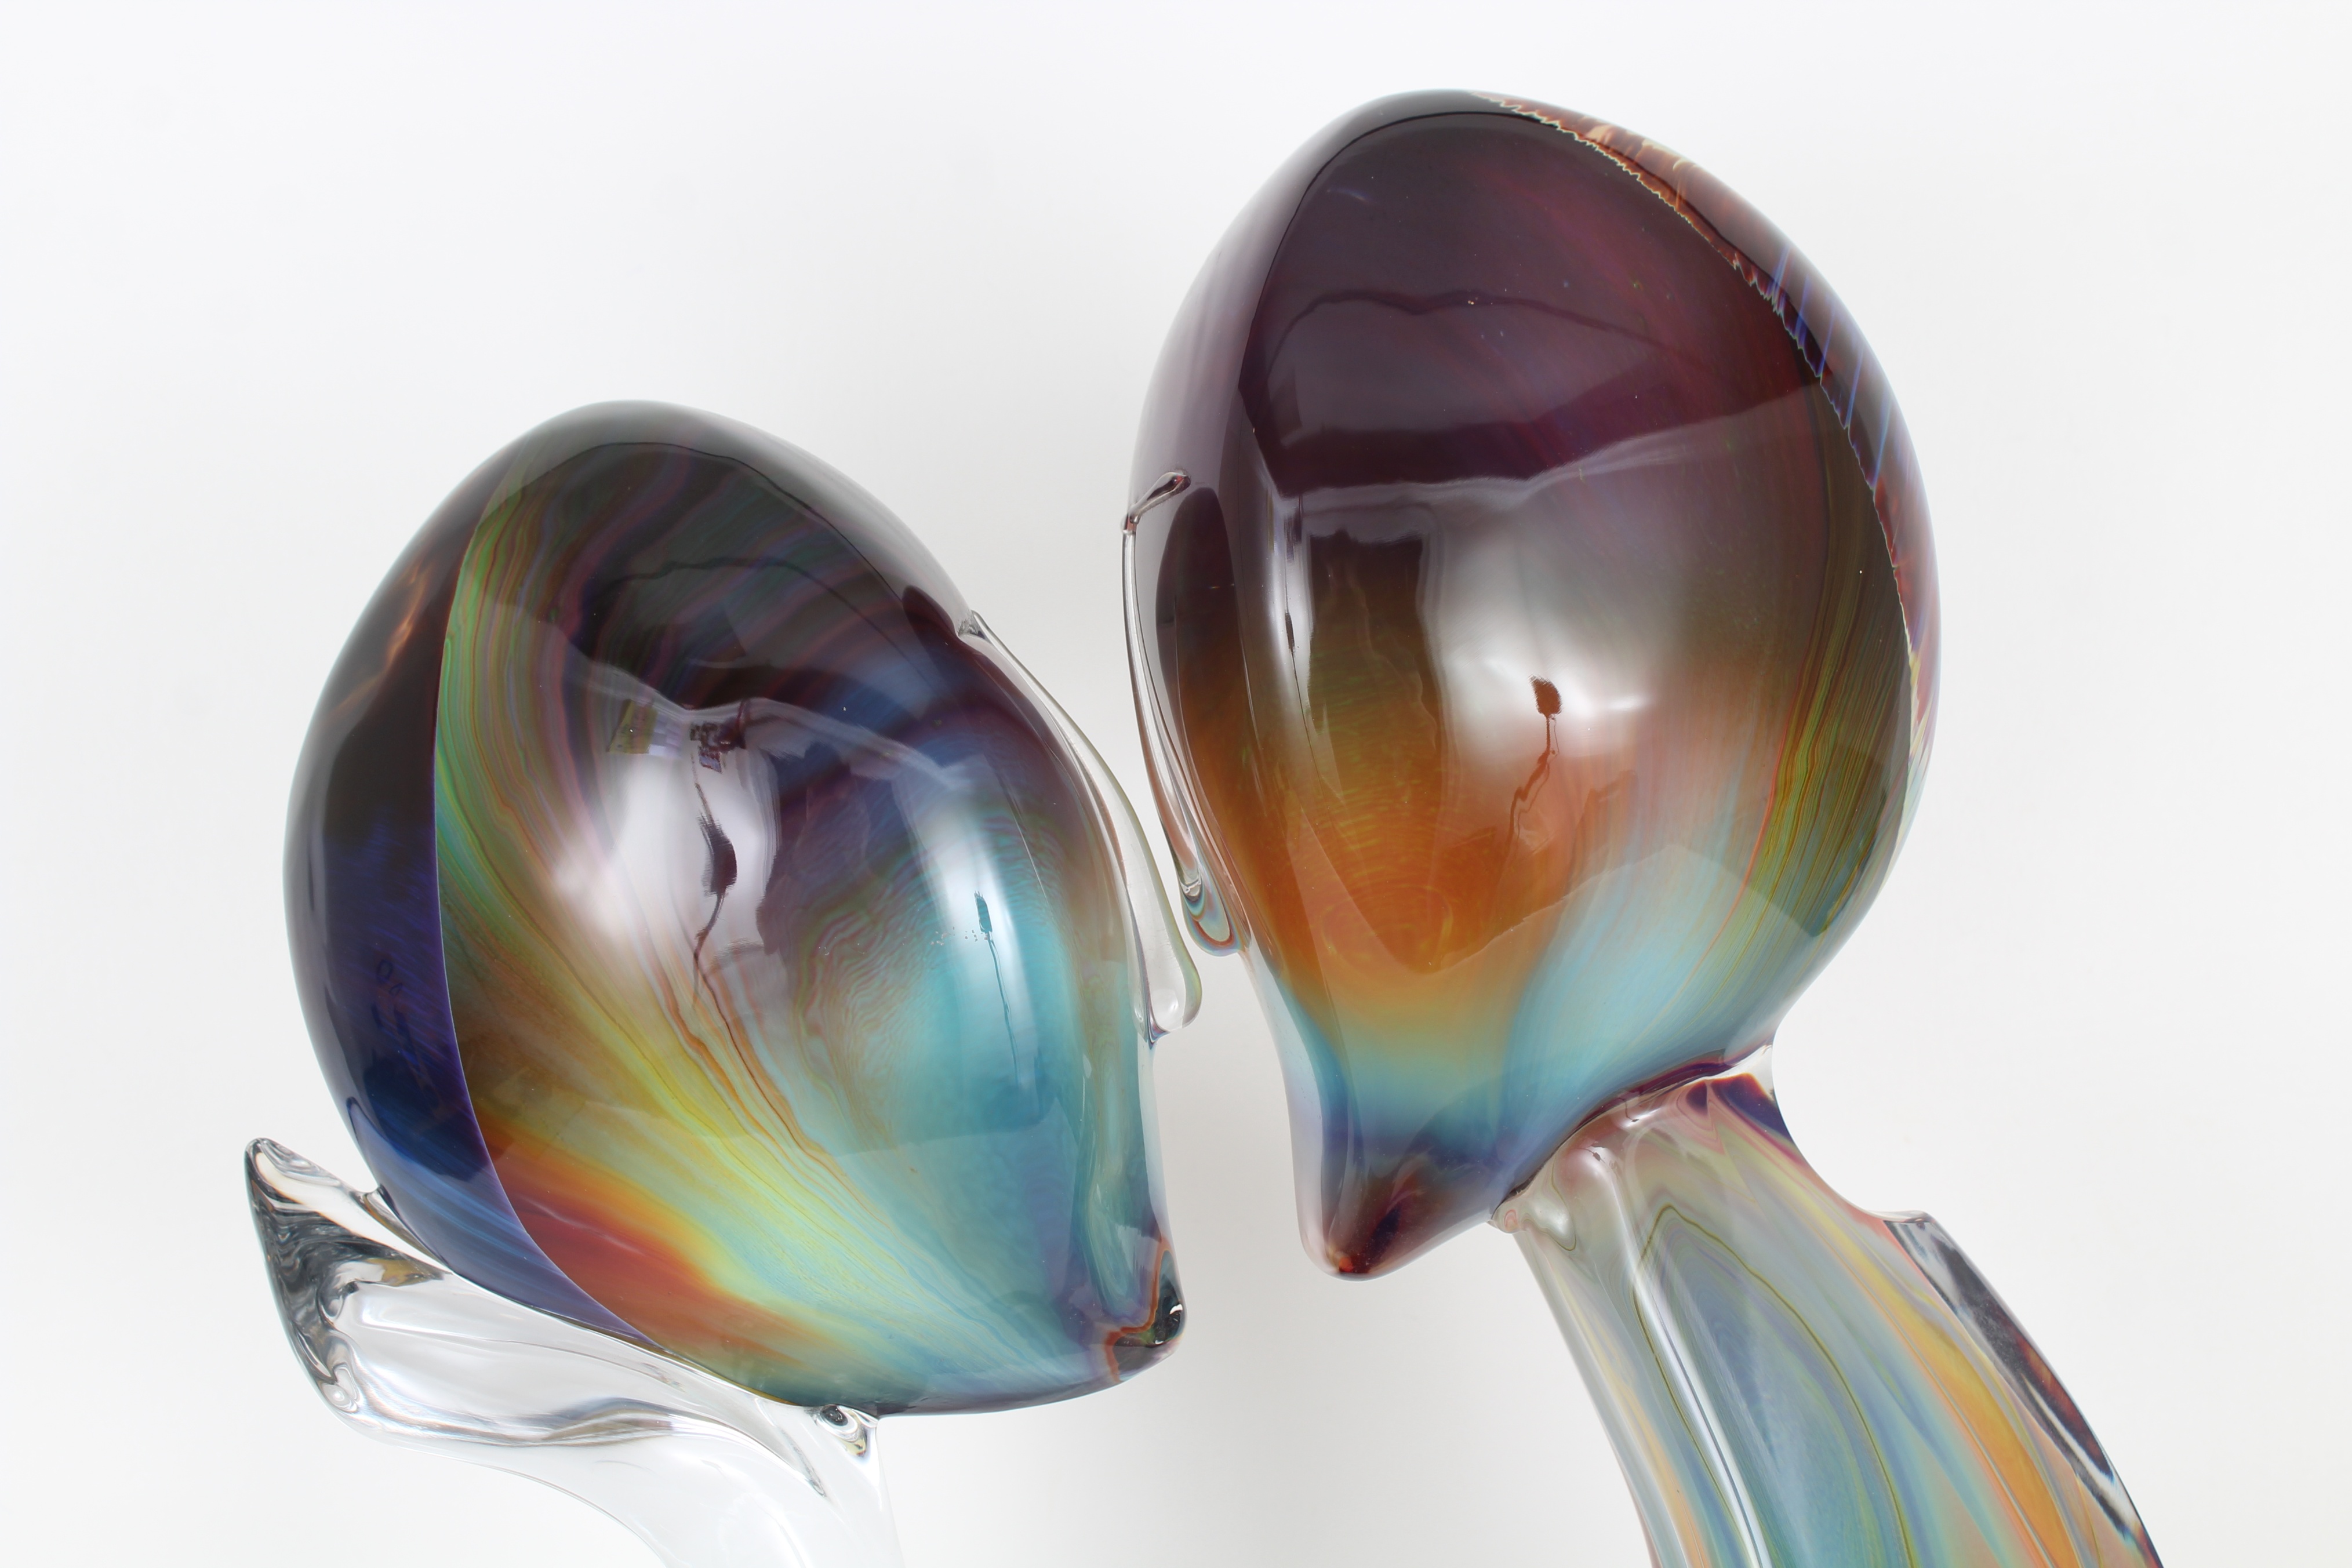 Dino Rosin "The Kiss" Glass Sculpture - Image 3 of 9